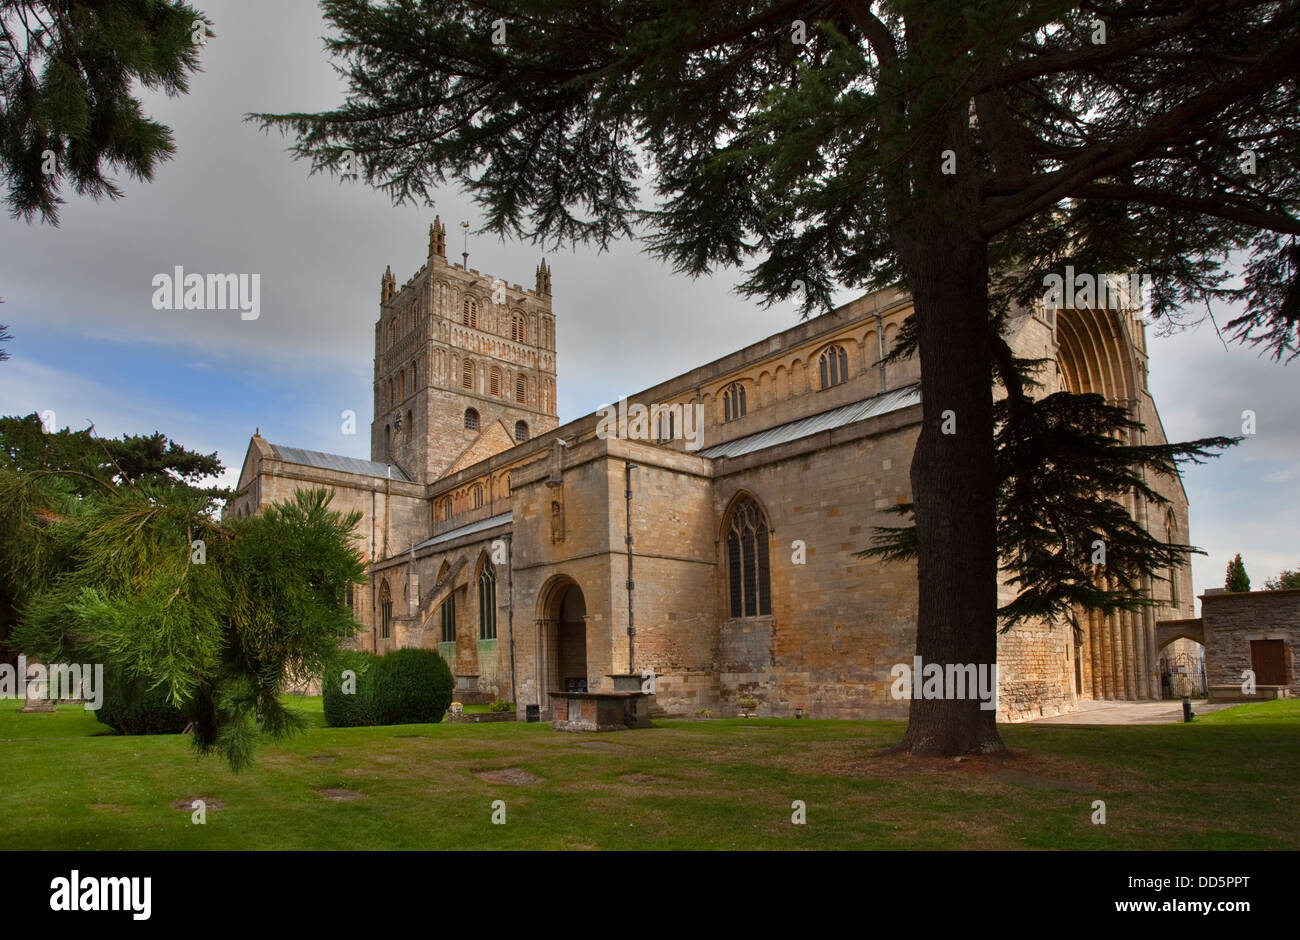 The Abbey of the Blessed Virgin Mary, Tewkesbury, Gloucestershire, England Stock Photo